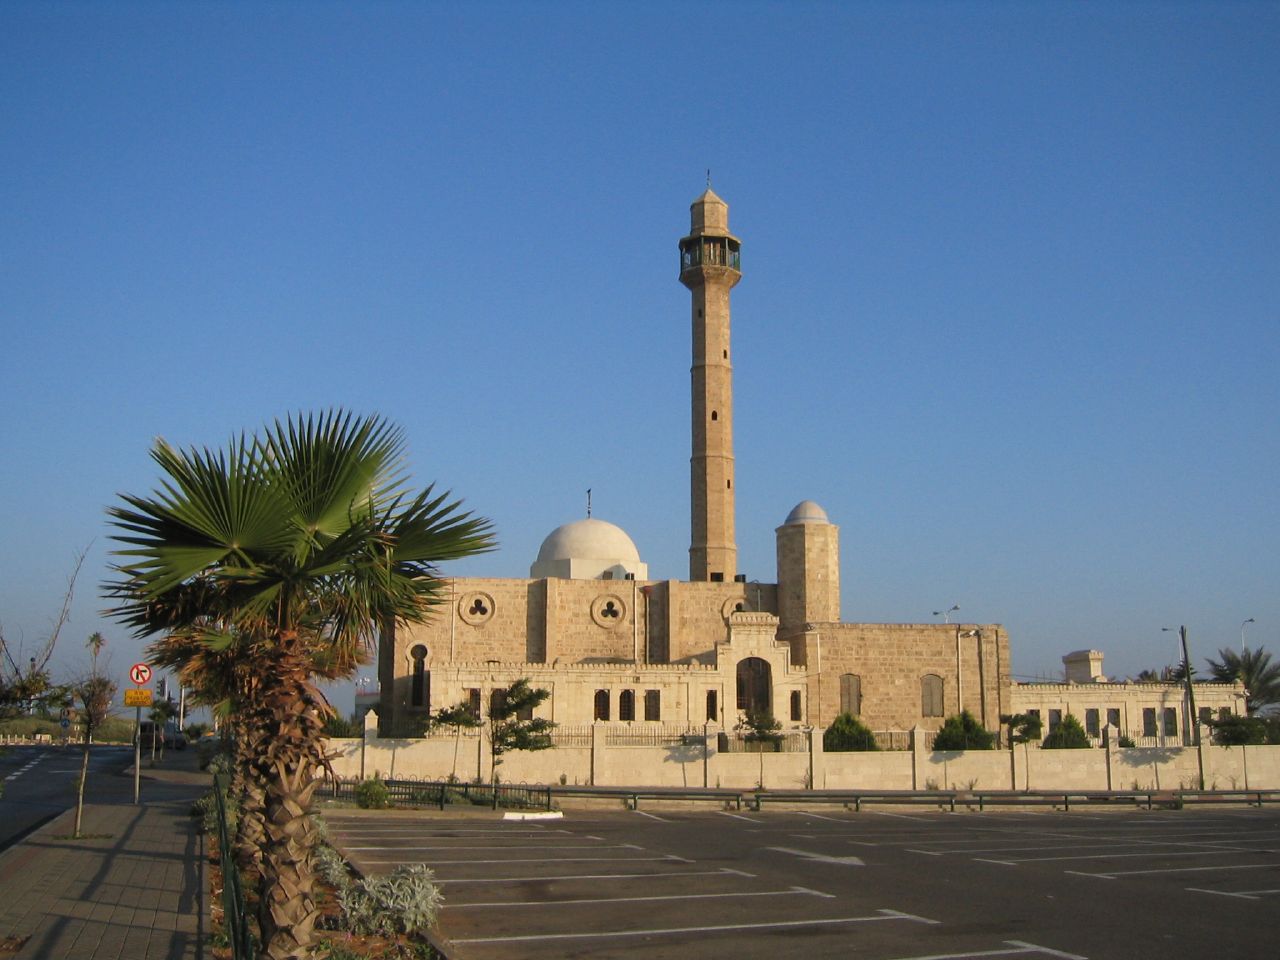 The mosque of the ethnically-cleansed Palestinian village of Sidna.